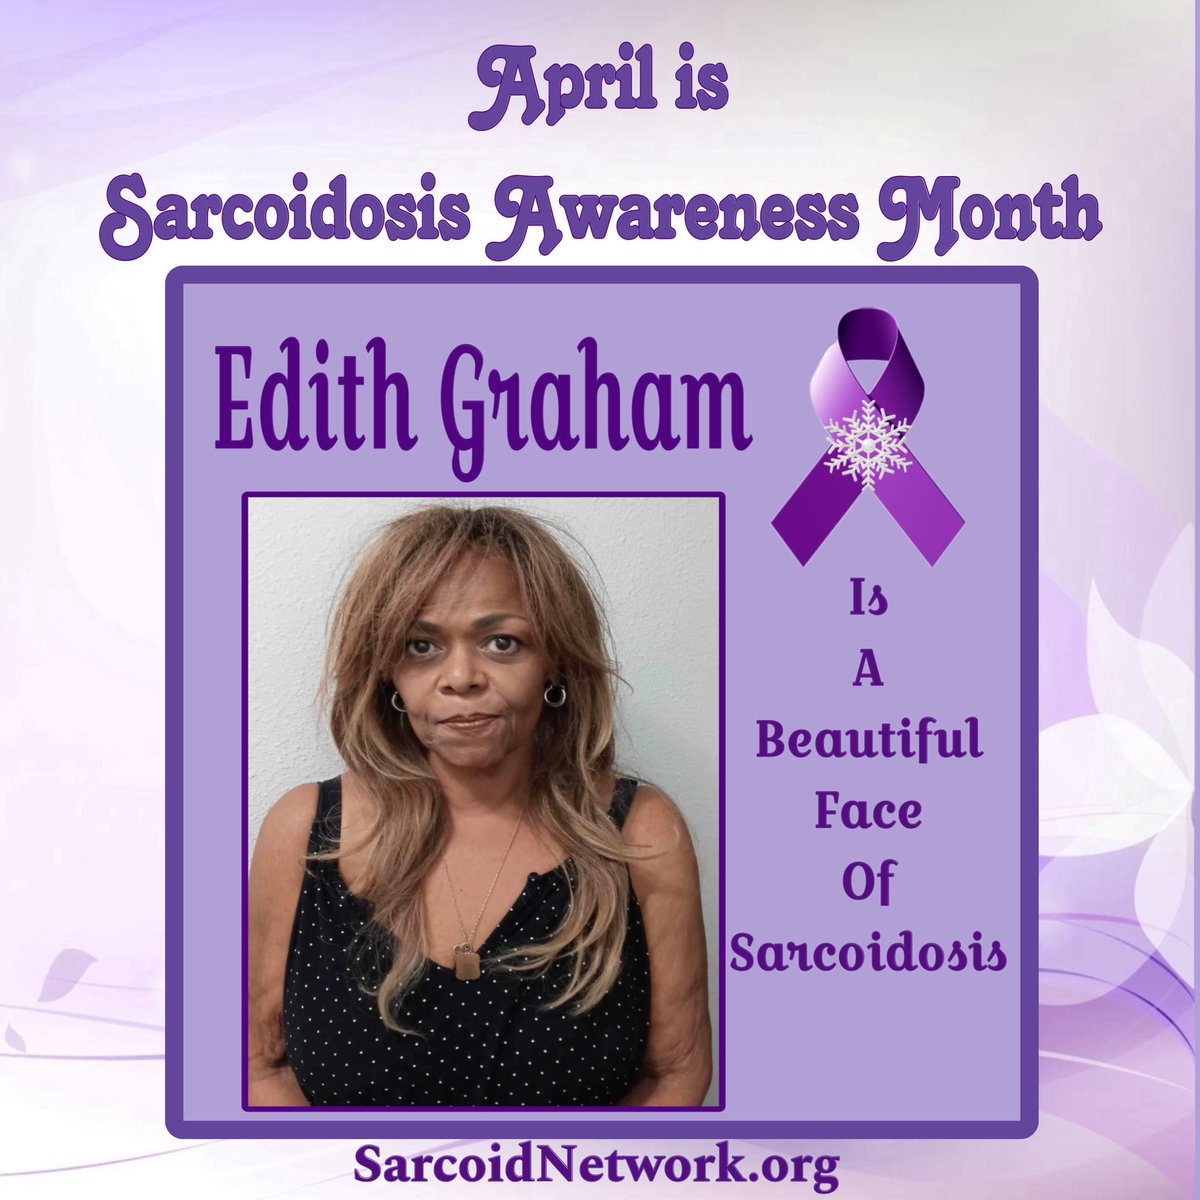 This is our Sarcoidosis Sister Edith Graham and she is a Beautiful Face of Sarcoidosis!💜 #Sarcoidosis #raredisease #patientadvocate #sarcoidosisadvocate #beautifulfacesofsarcoidosis #sarcoidosisawarenessmonth